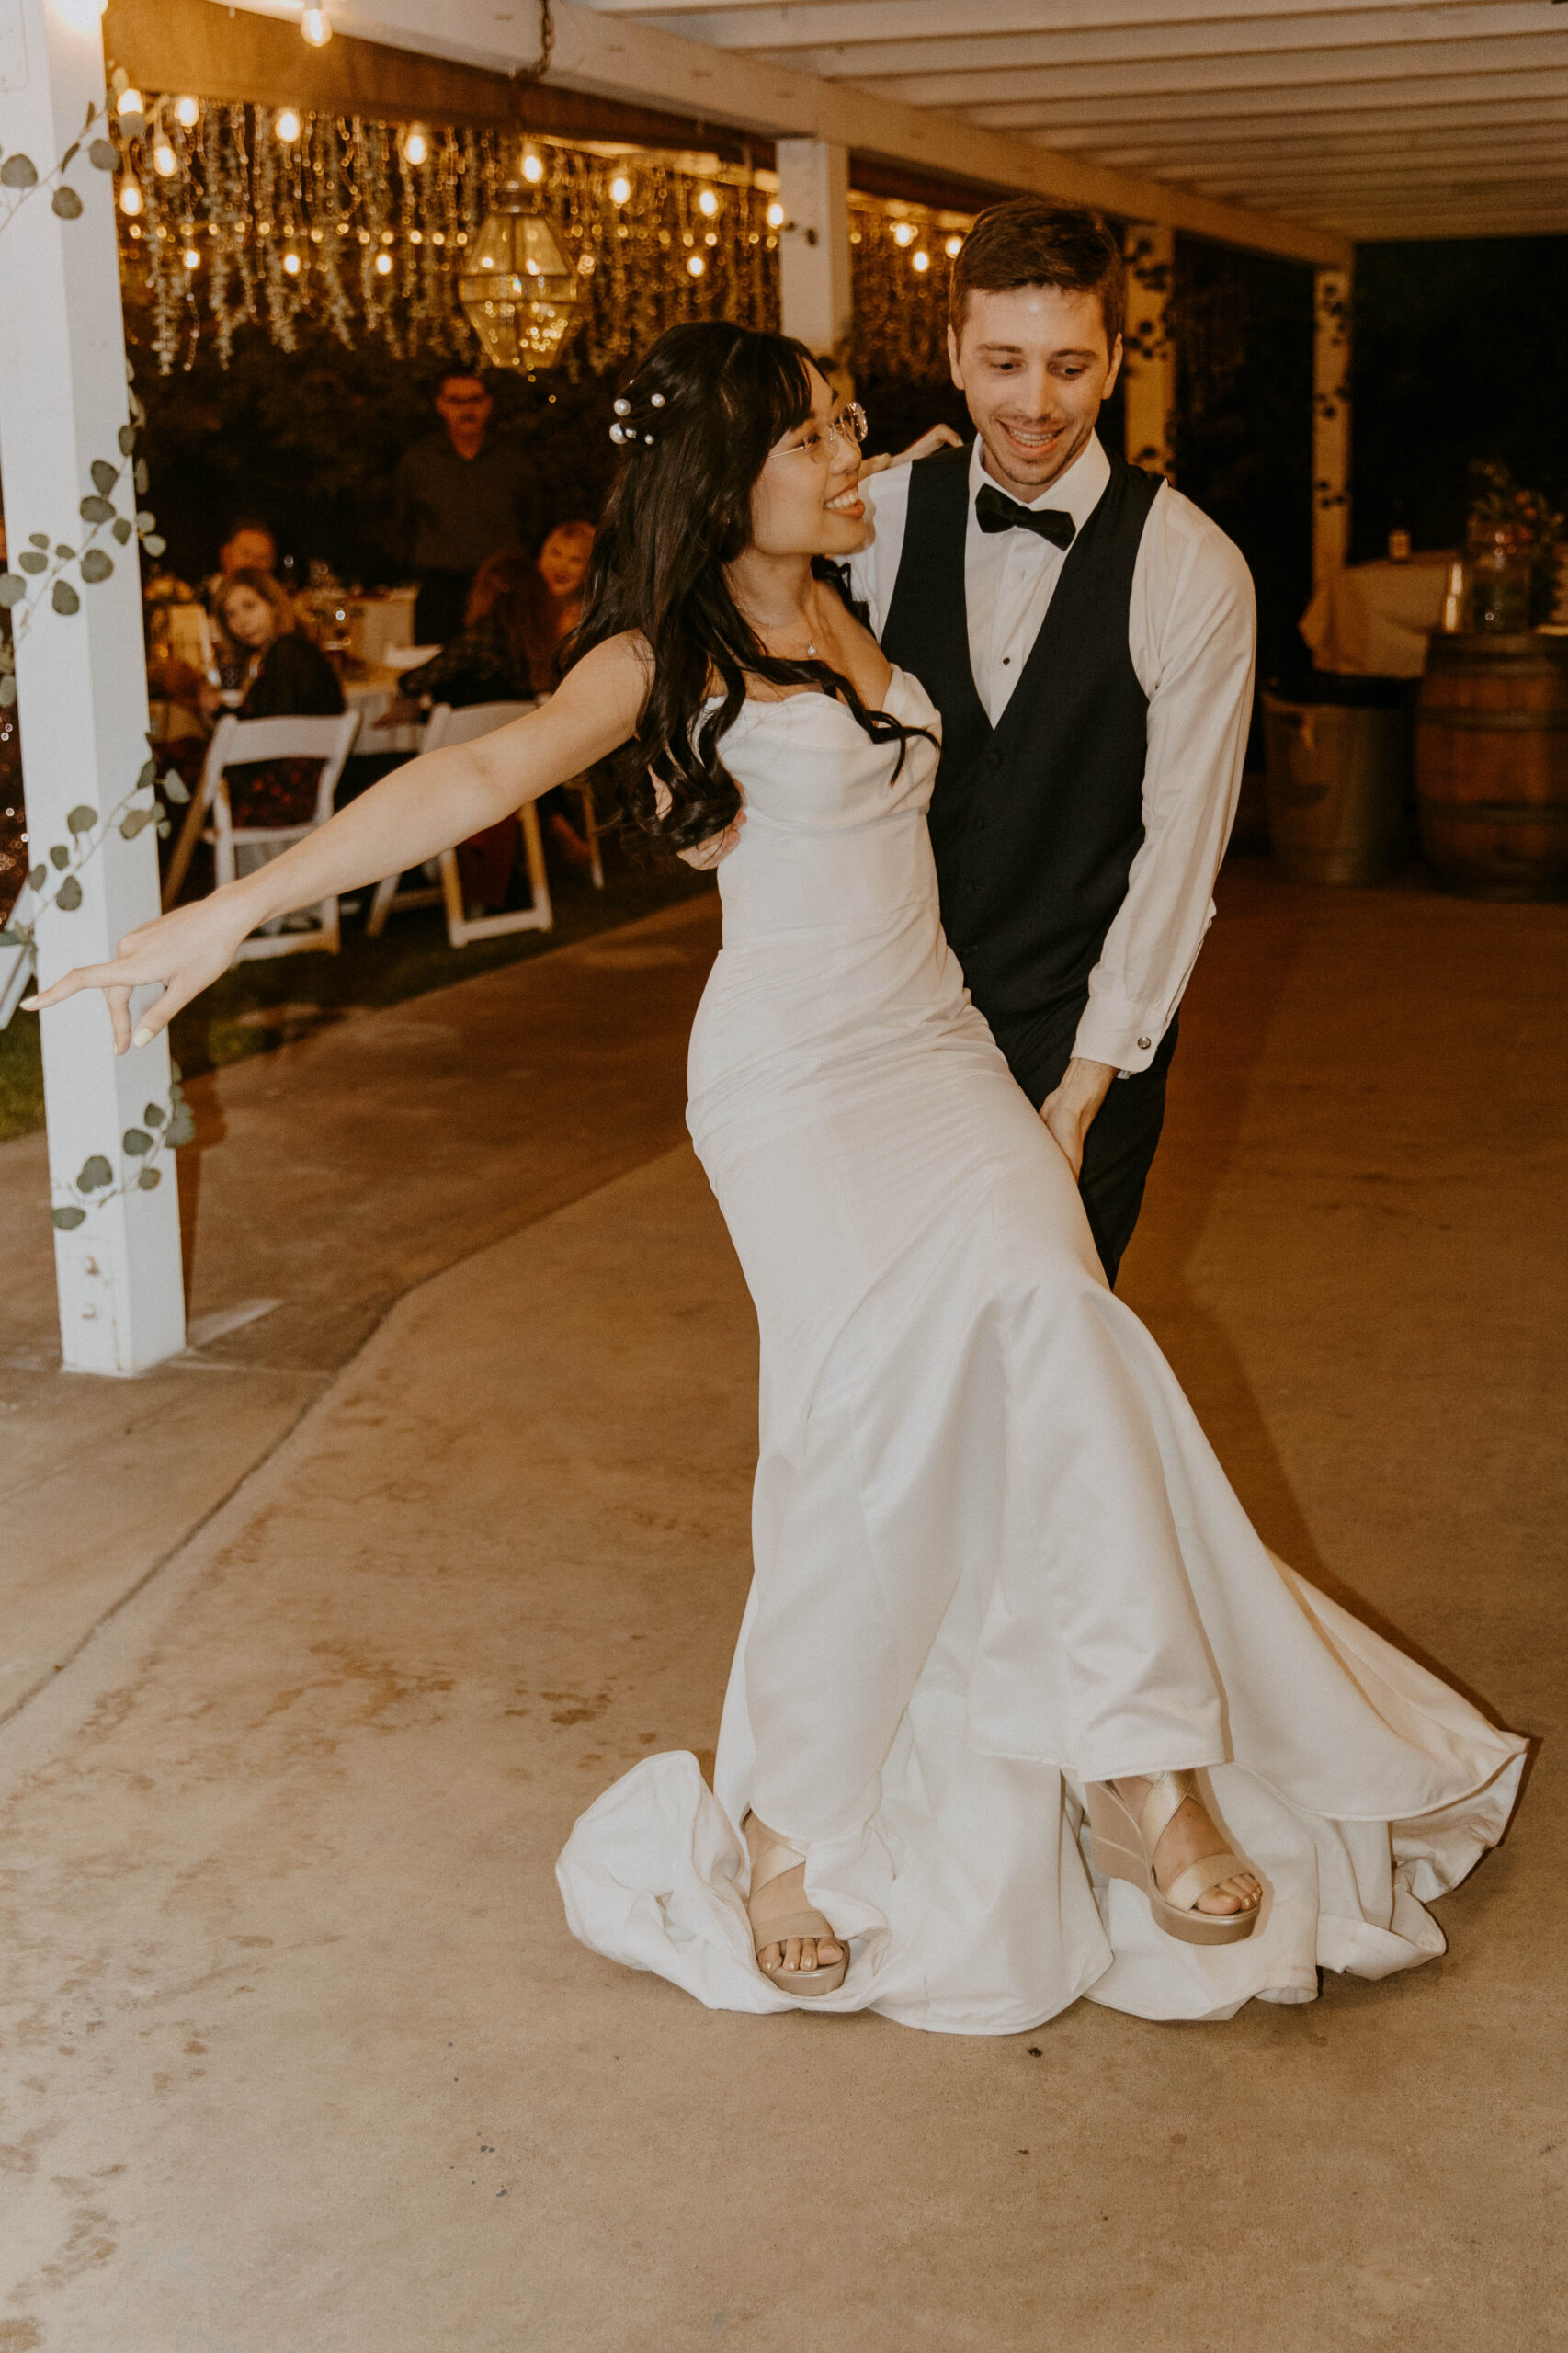 A couple shares their first dance at an evening wedding reception under strings of lights at their intimate backyard wedding.